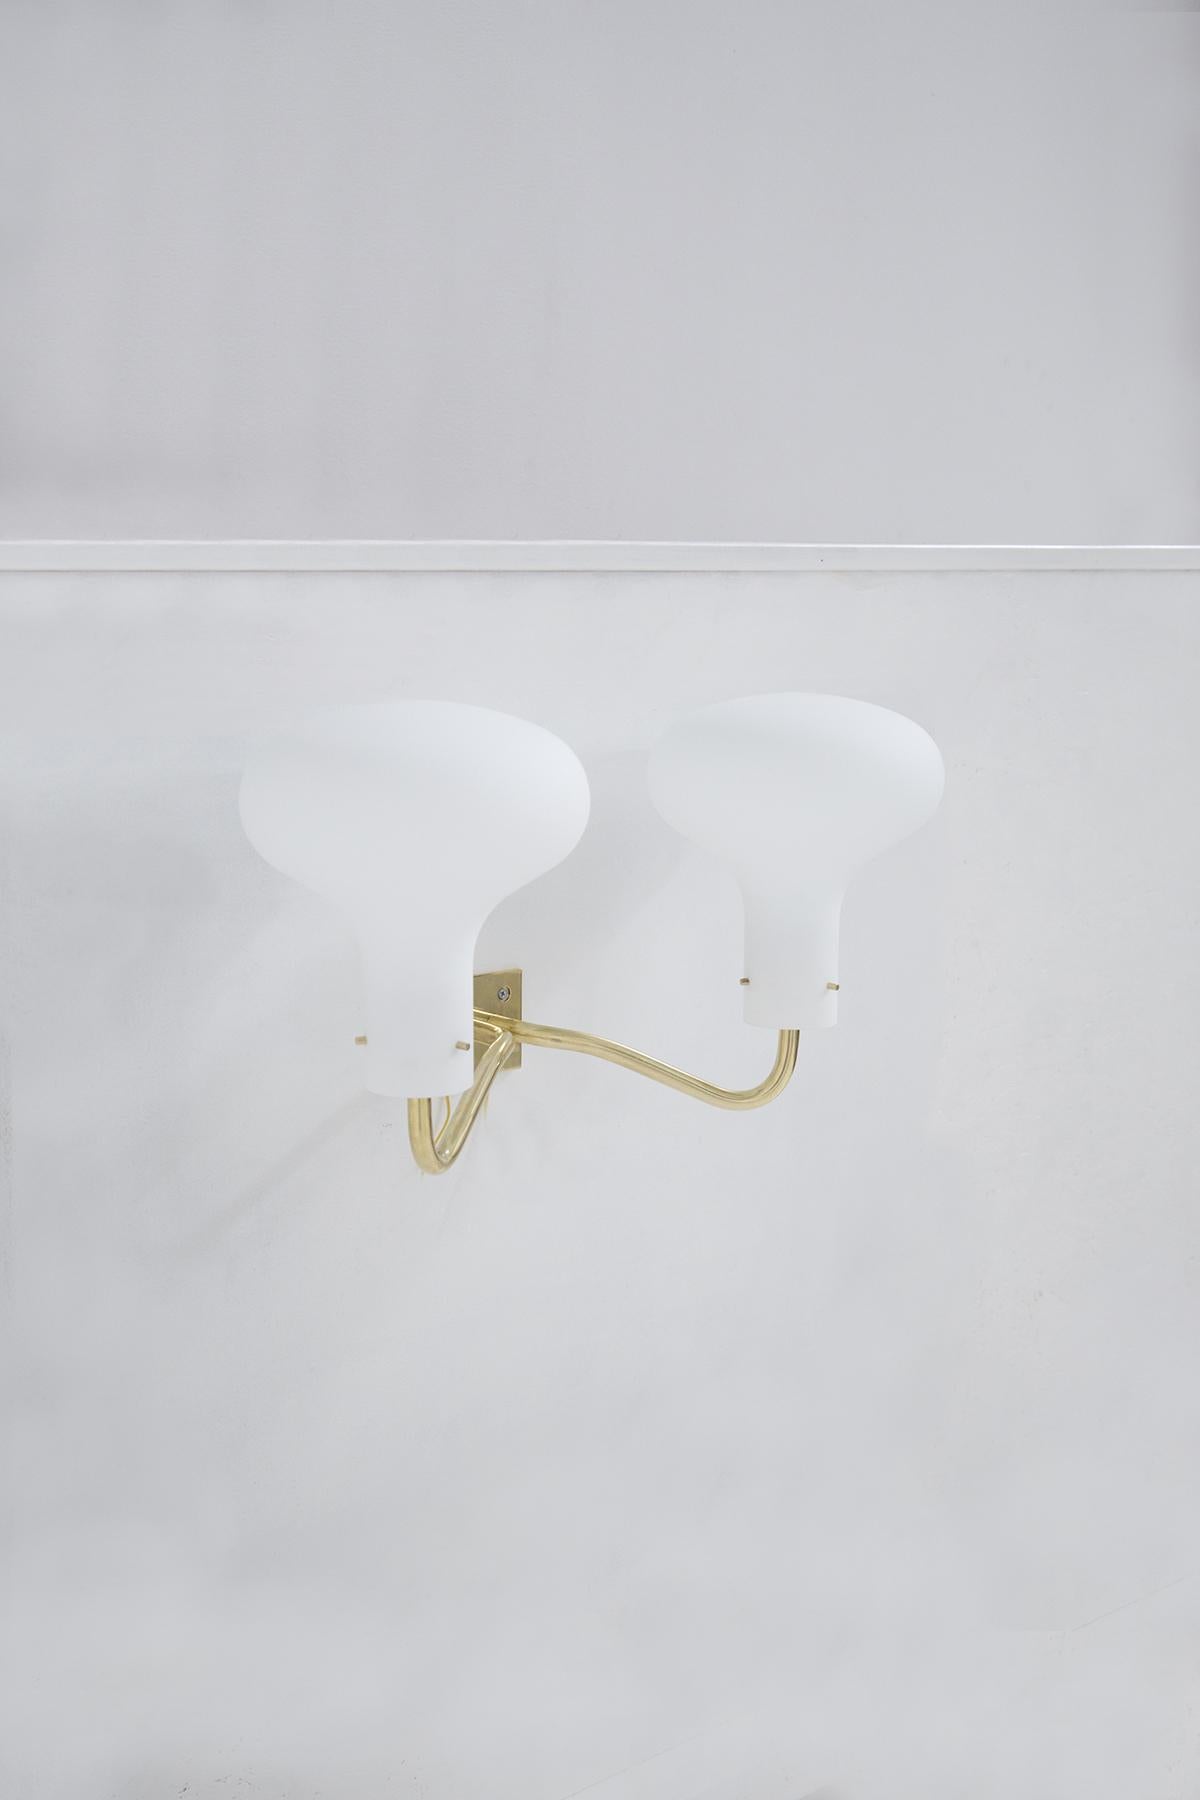 Pair of wall sconces by Ignazio Gardella in the 1960s for Italian manufacturer Azucena. The brand is visible in the pictures. The wall base is chrome-plated brass with two arms supporting two white opal glass lights. Each wall sconce holds two